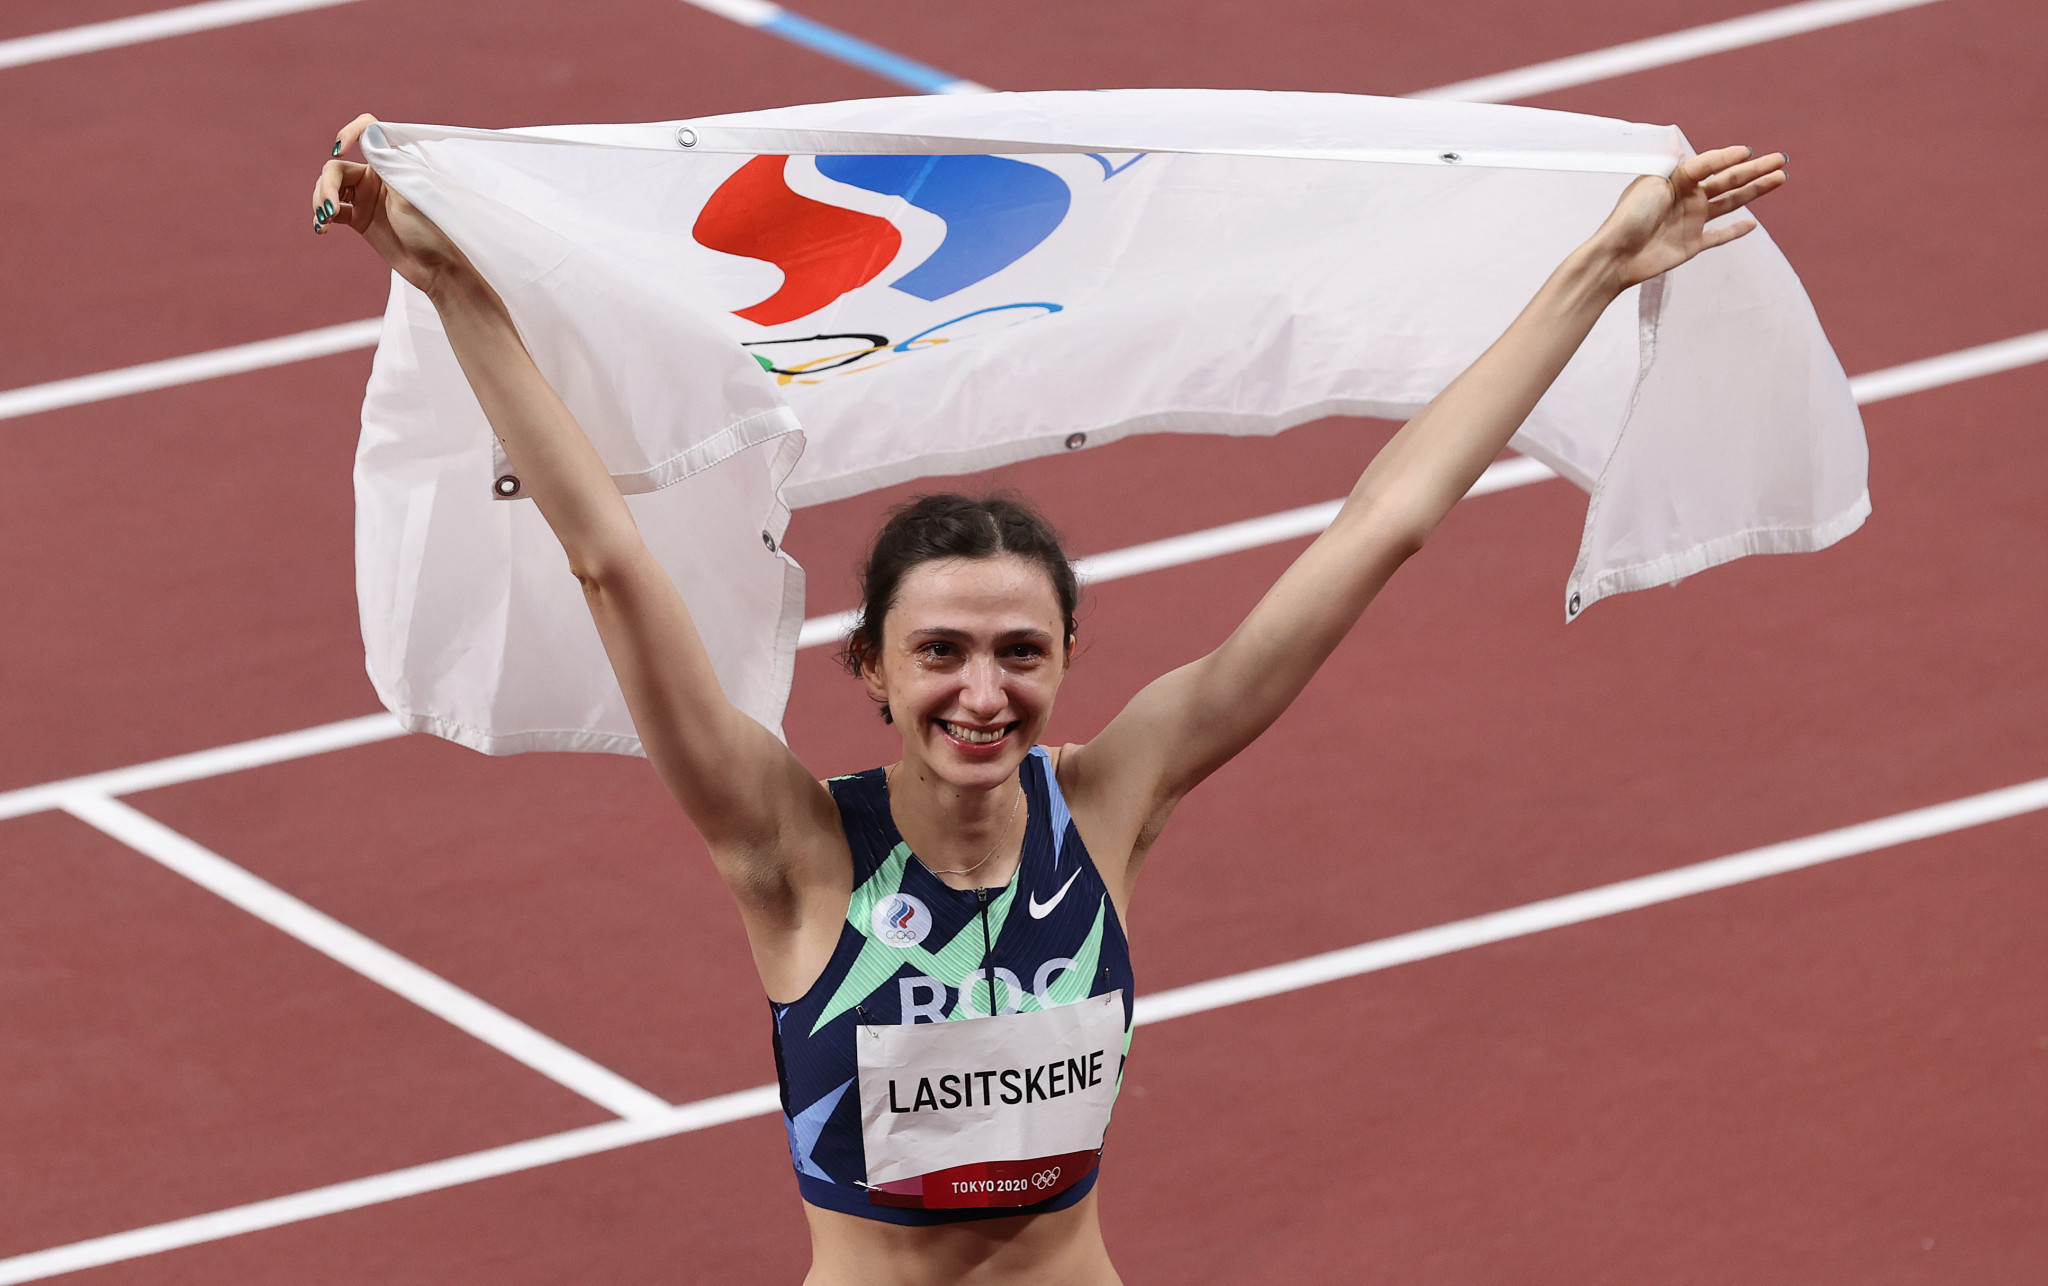 High jump Olympic champion Mariya Lasitskene has expressed concern at being able to compete at the World Championships in Eugene next year ©Getty Images